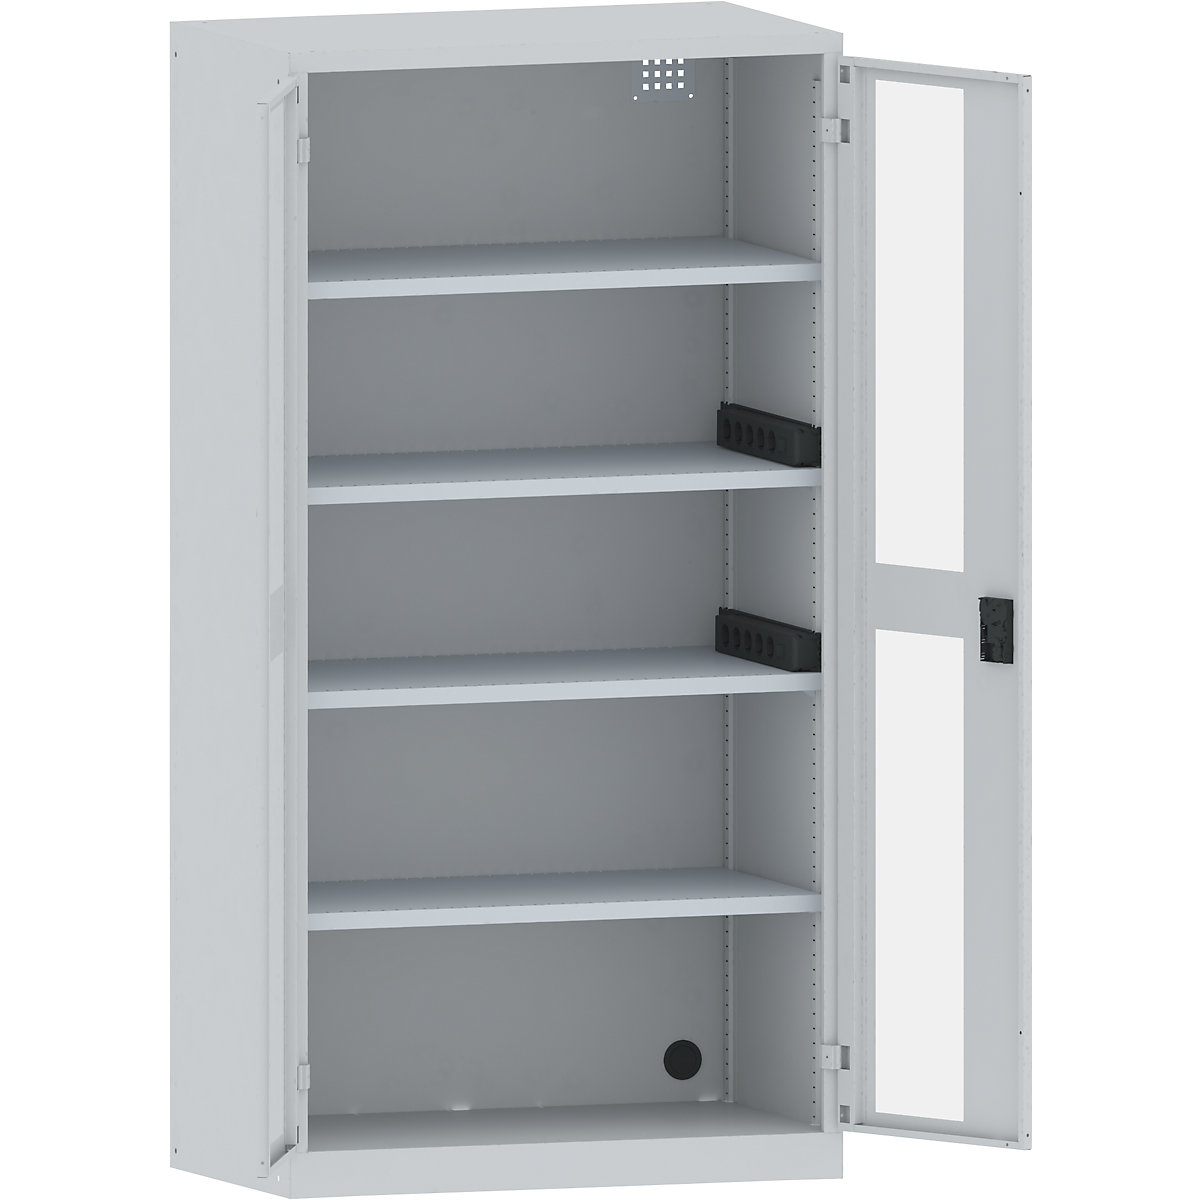 Battery charging cabinet – LISTA, 4 shelves, vision panel doors, 2 power strips at side, grey-10